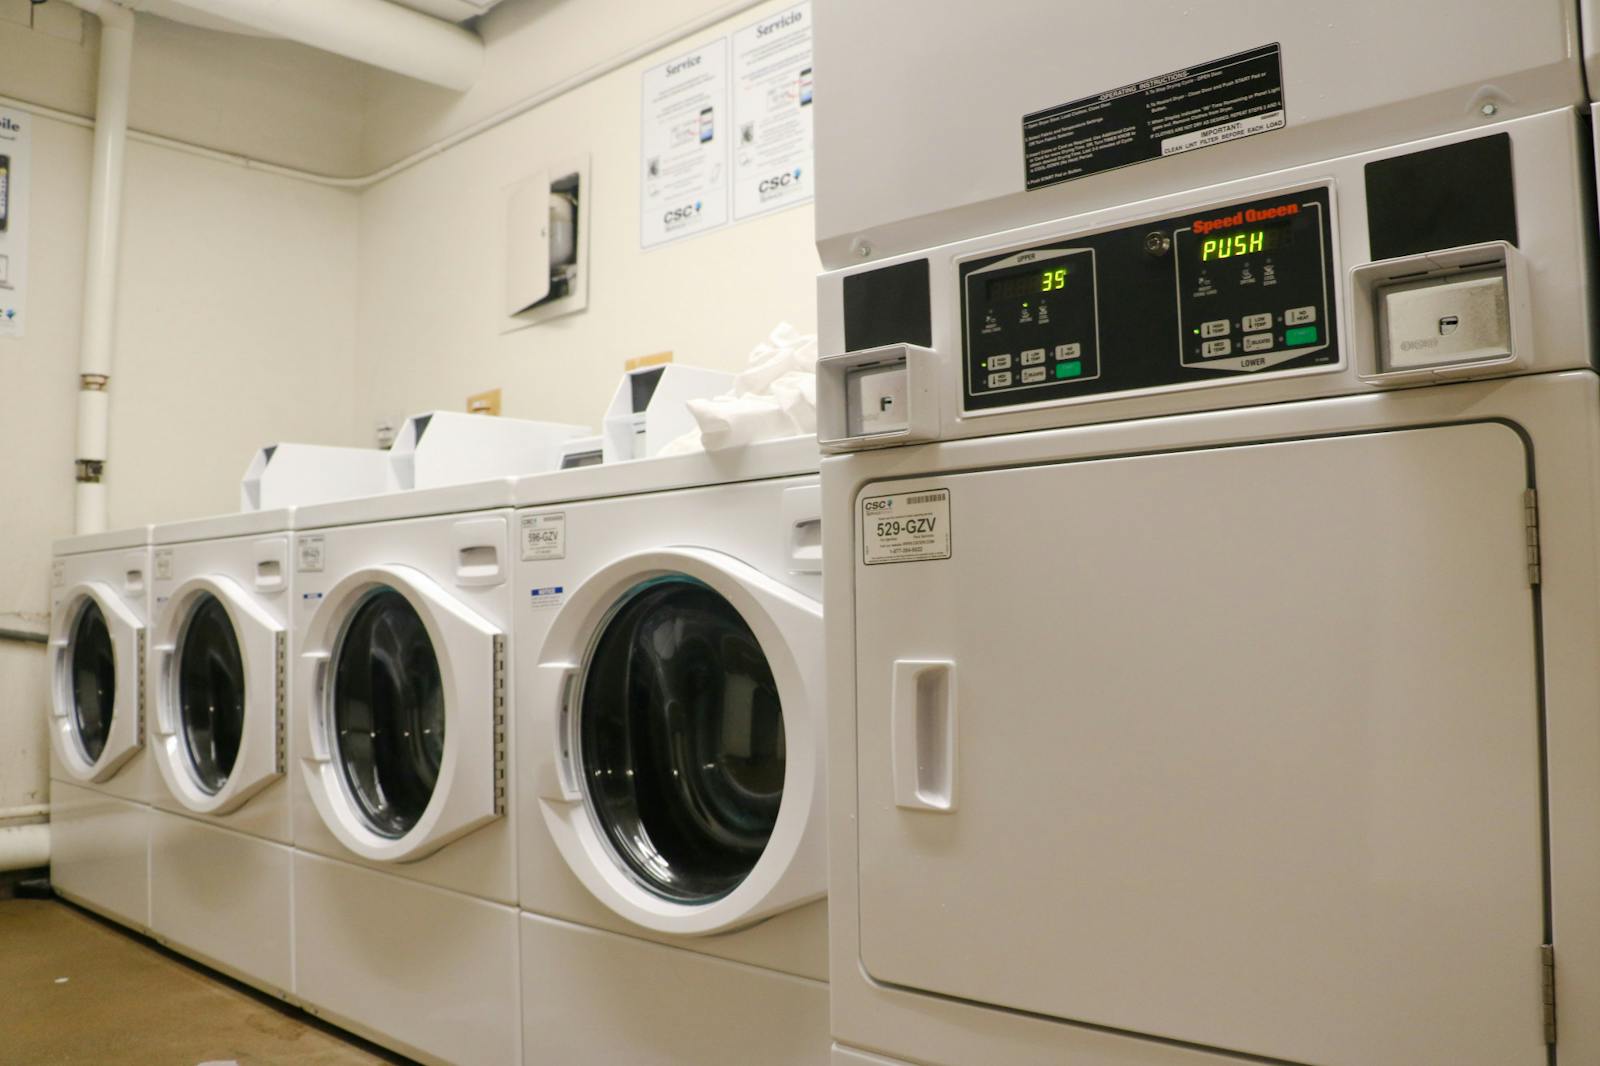 Brown replaces washing machines, dryers in dorms